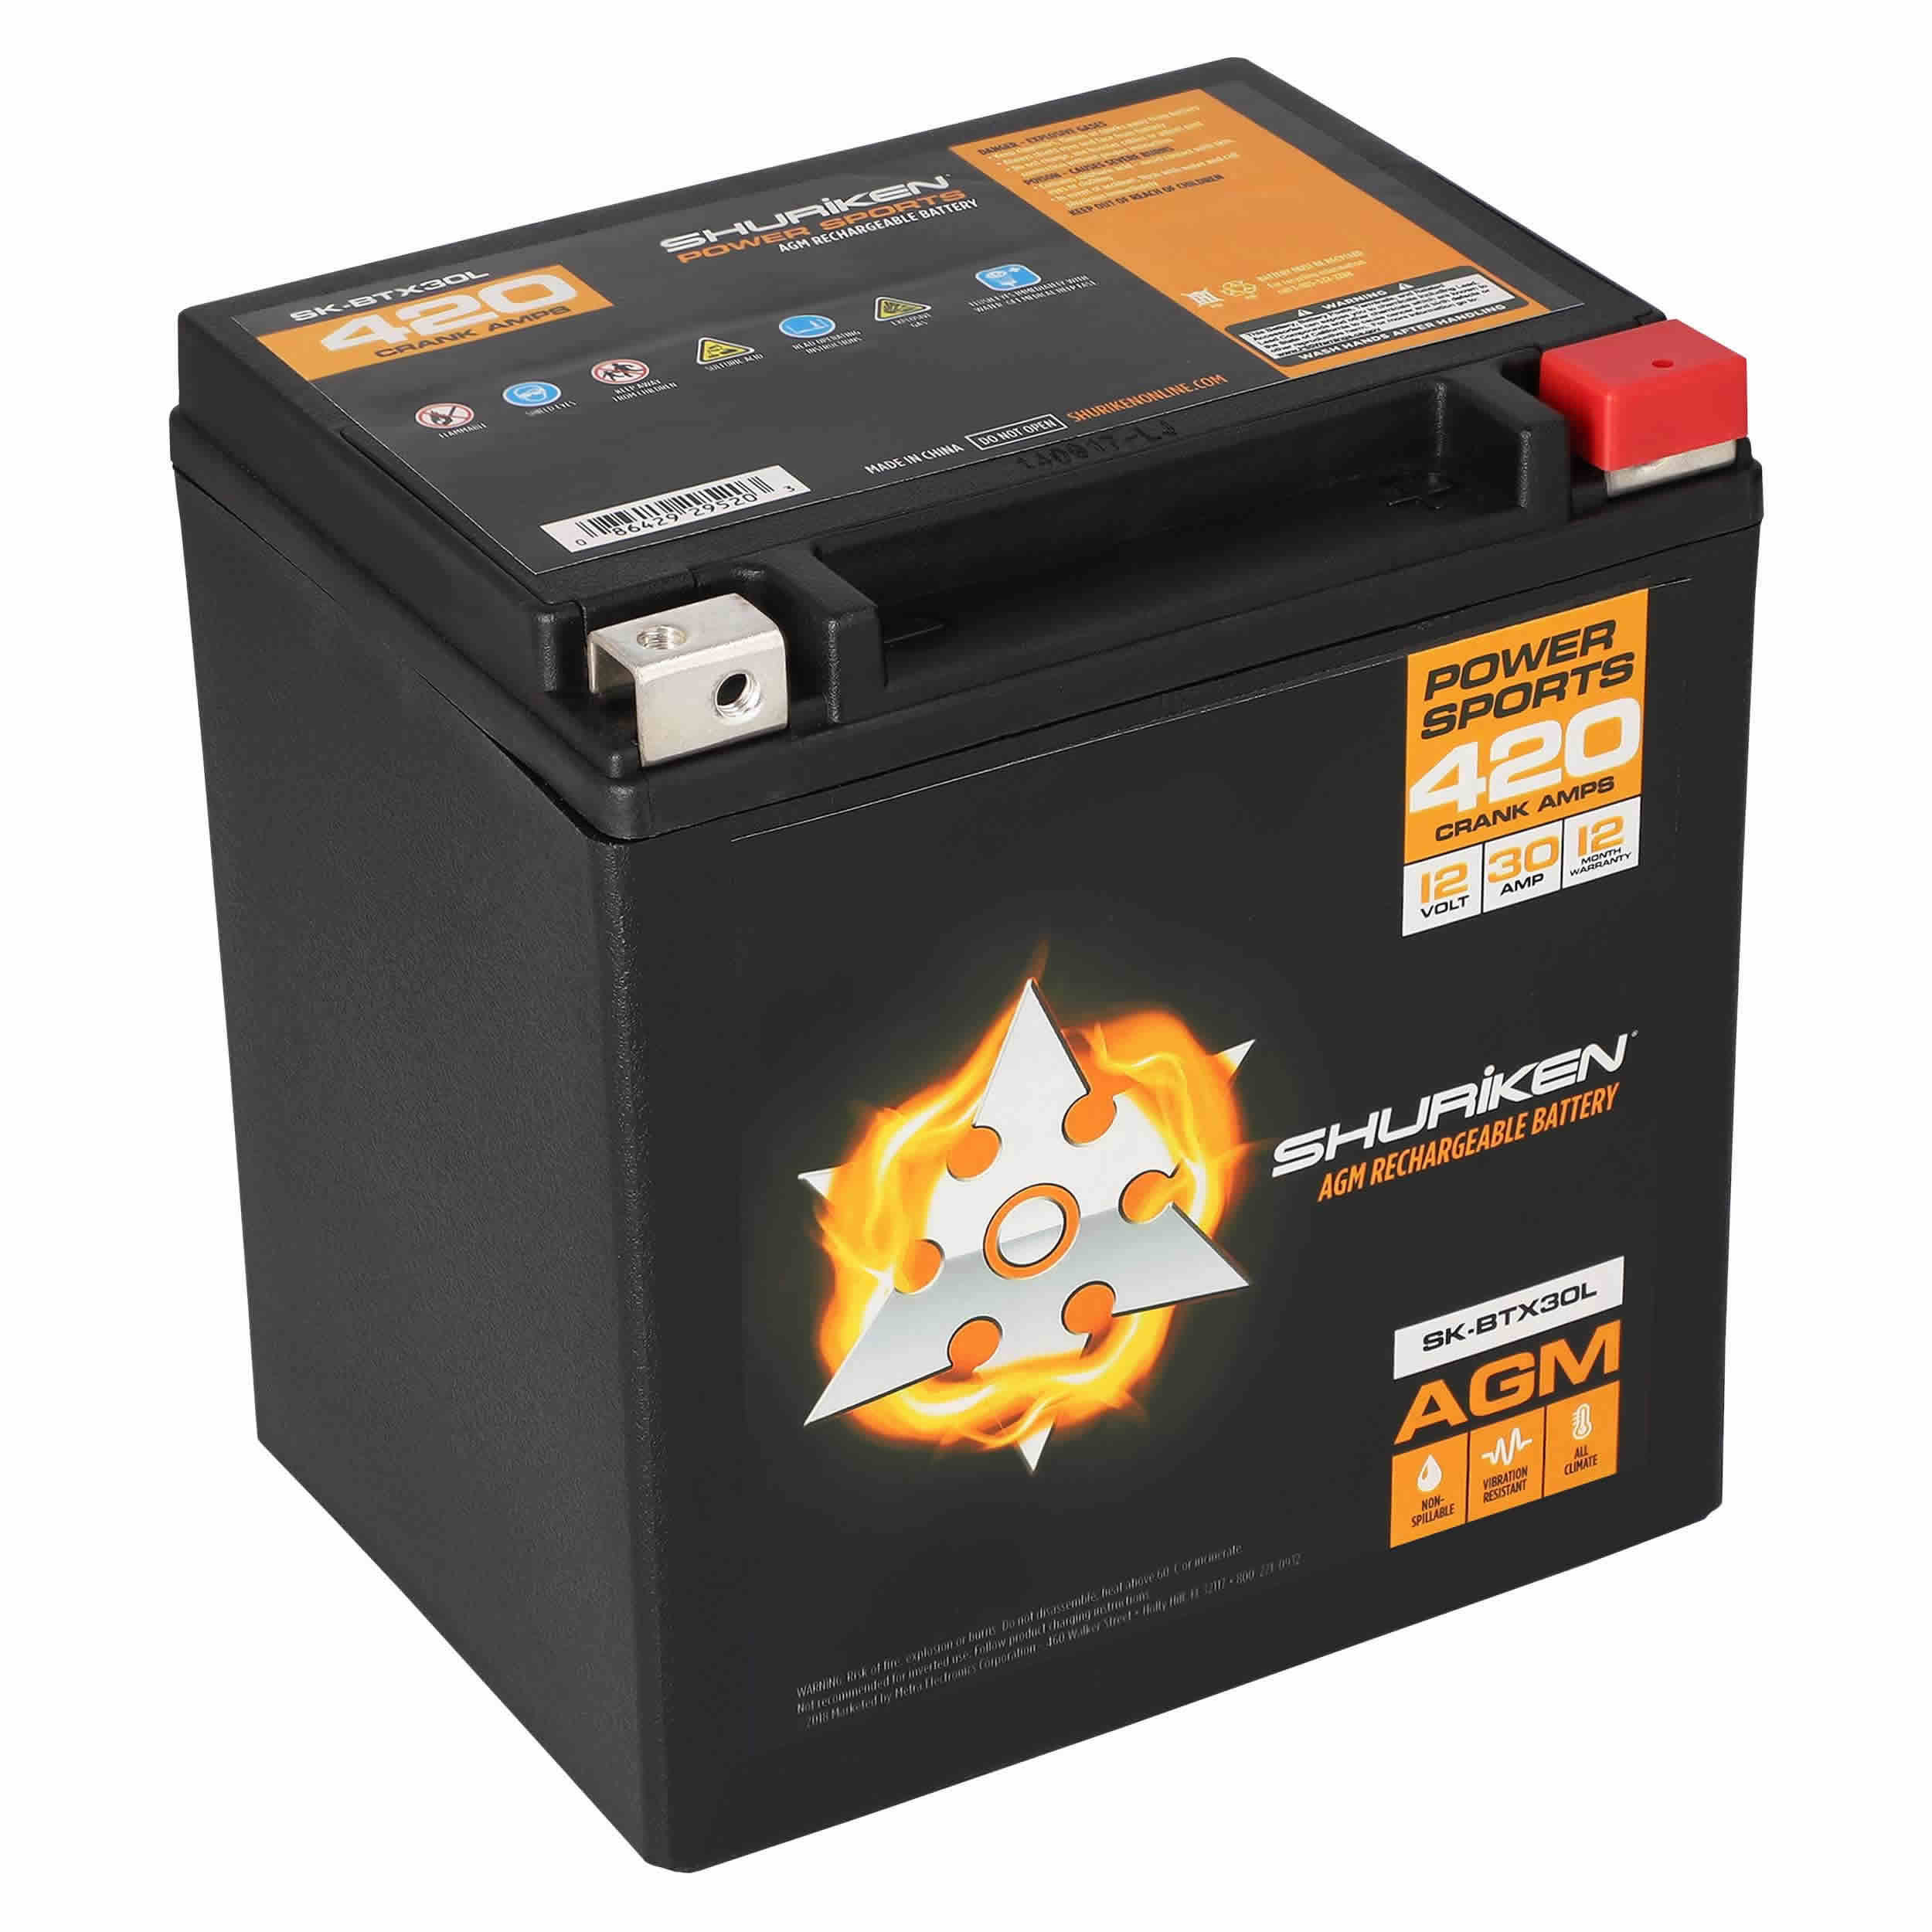 420 Crank AMPS 30AMP Hours AGM Battery